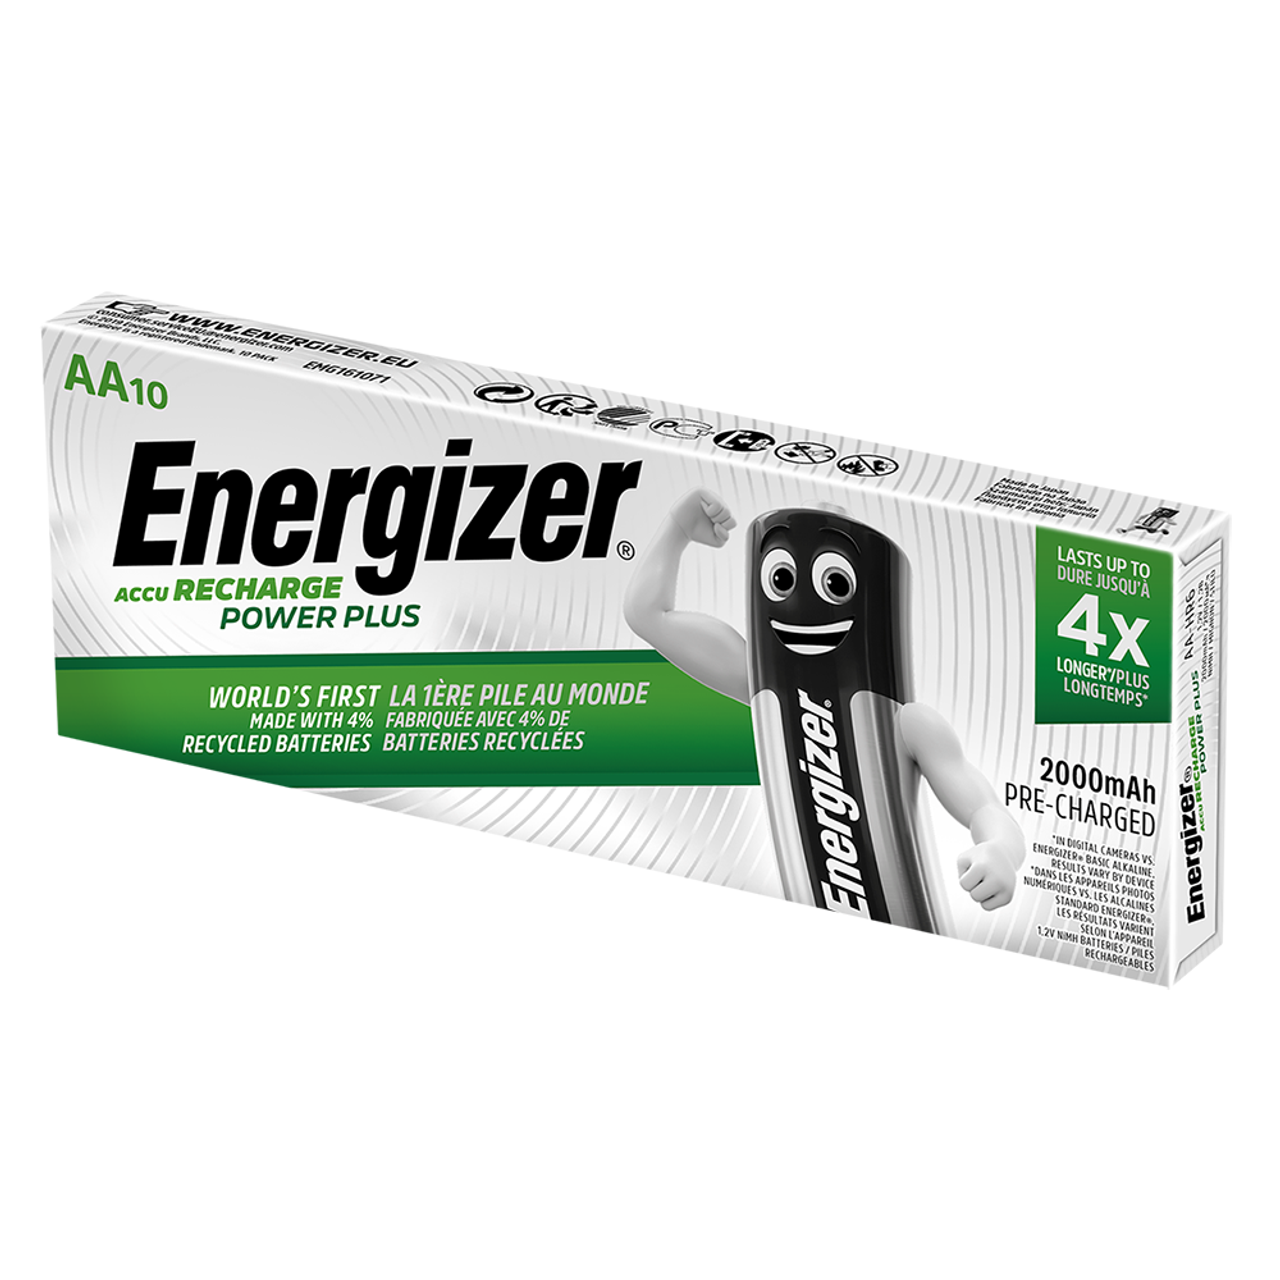 Energizer Power Plus AA 2000mAh Rechargeable Battery